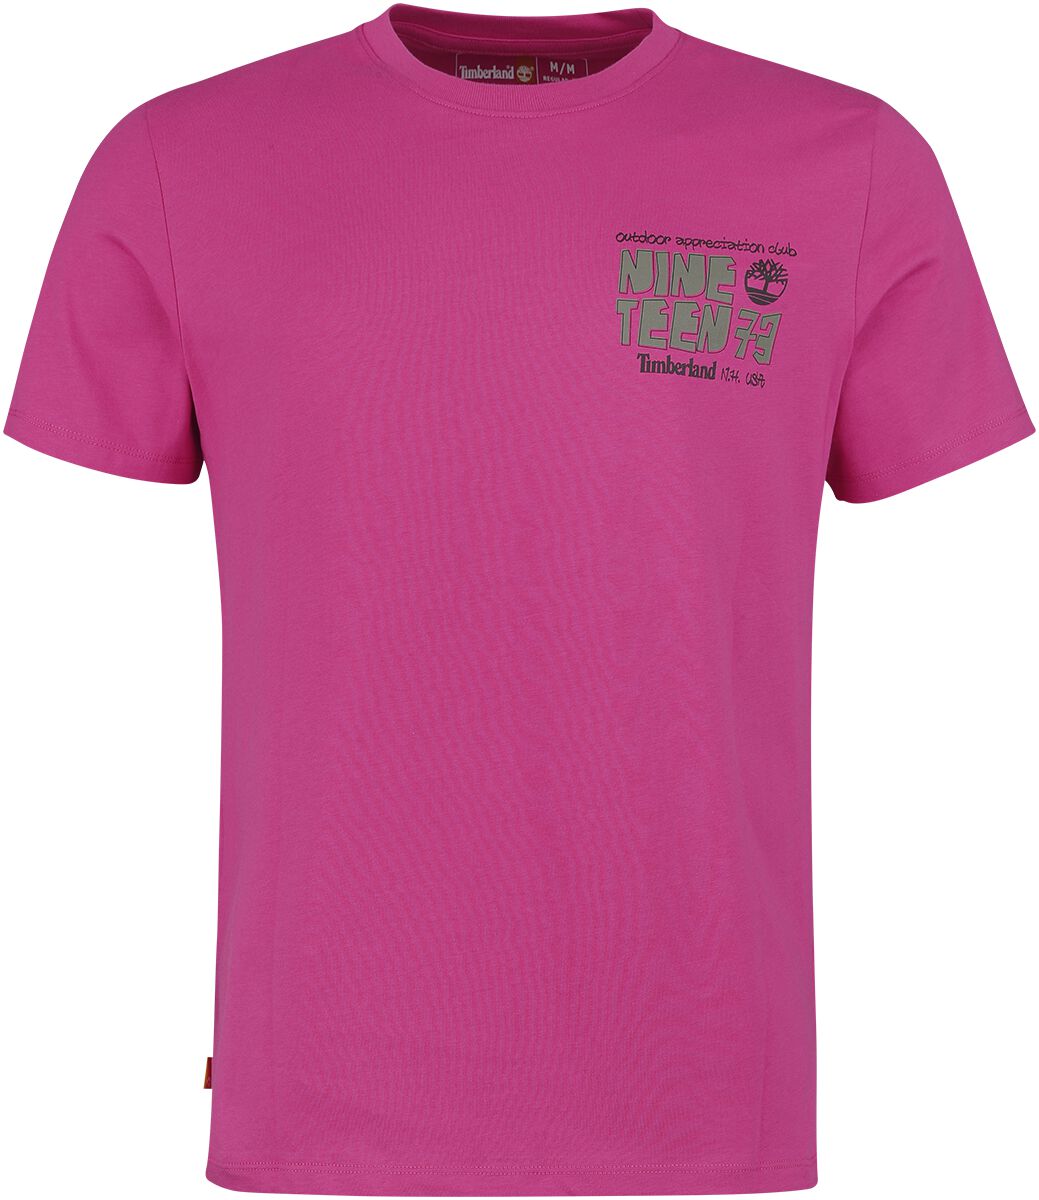 Timberland Outdoor Back Graphic Tee T-Shirt pink in M